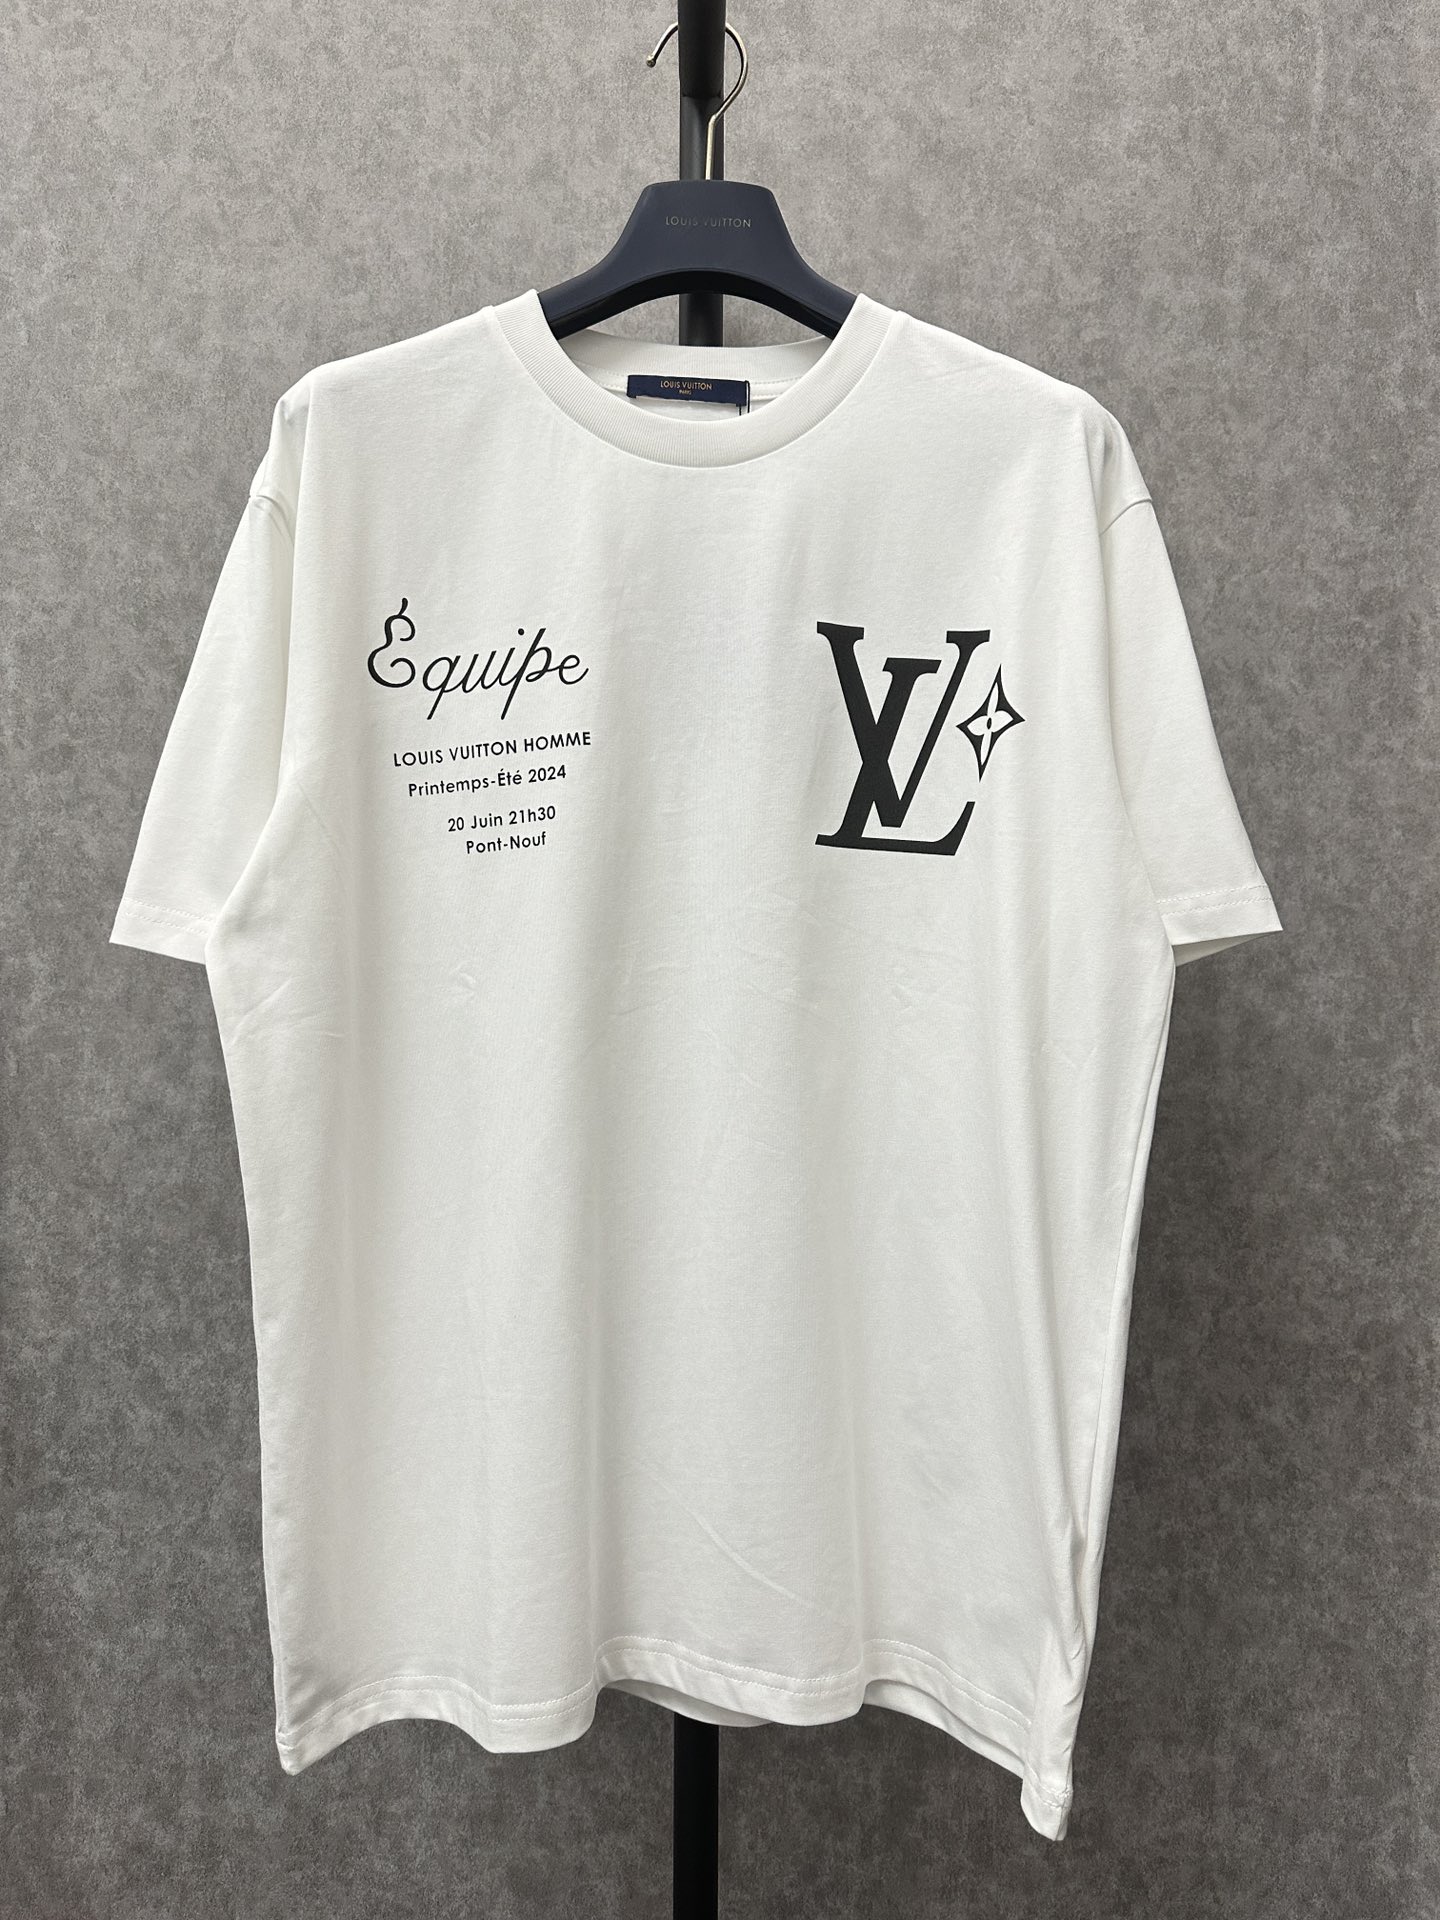 Louis Vuitton Copy
 Clothing T-Shirt Black White Printing Unisex Cotton Spring/Summer Collection Short Sleeve